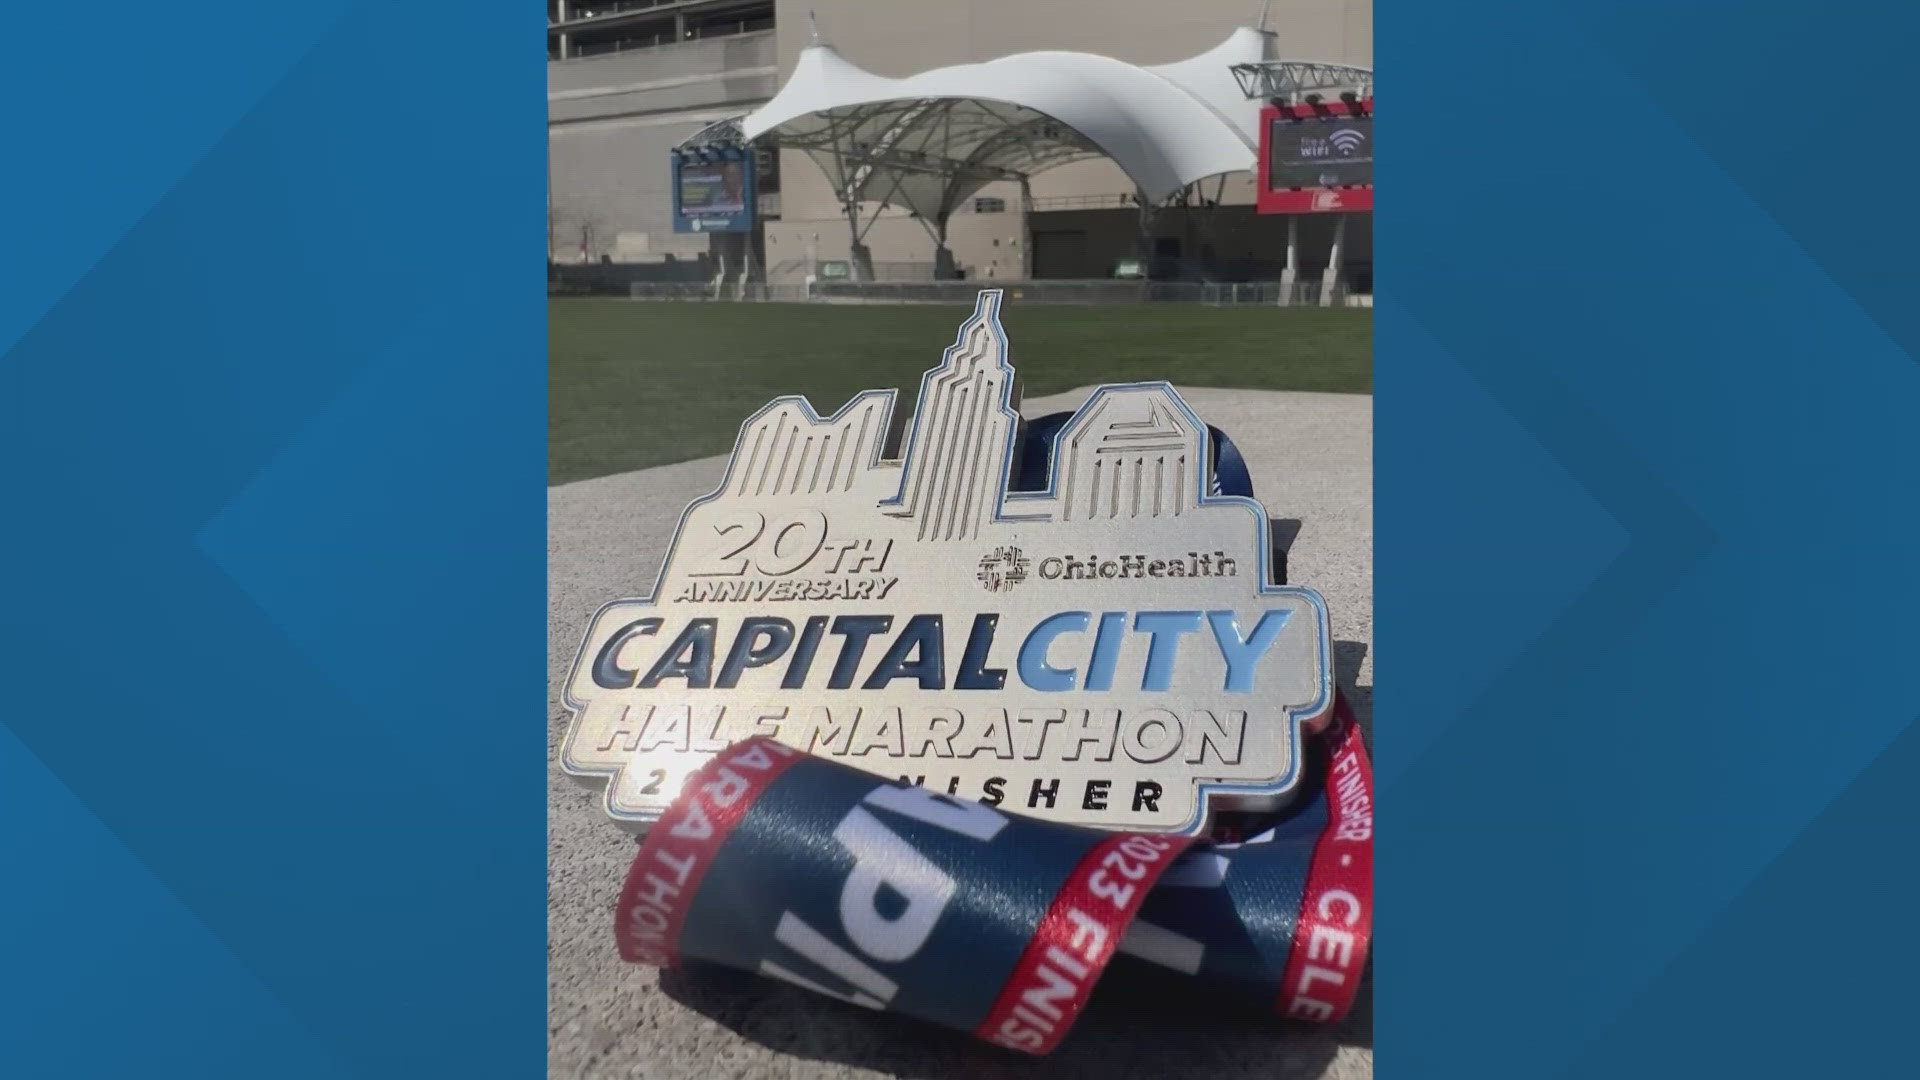 Now in its 20th year, the OhioHealth Capital City Half & Quarter Marathon is returning to downtown Columbus on Saturday.